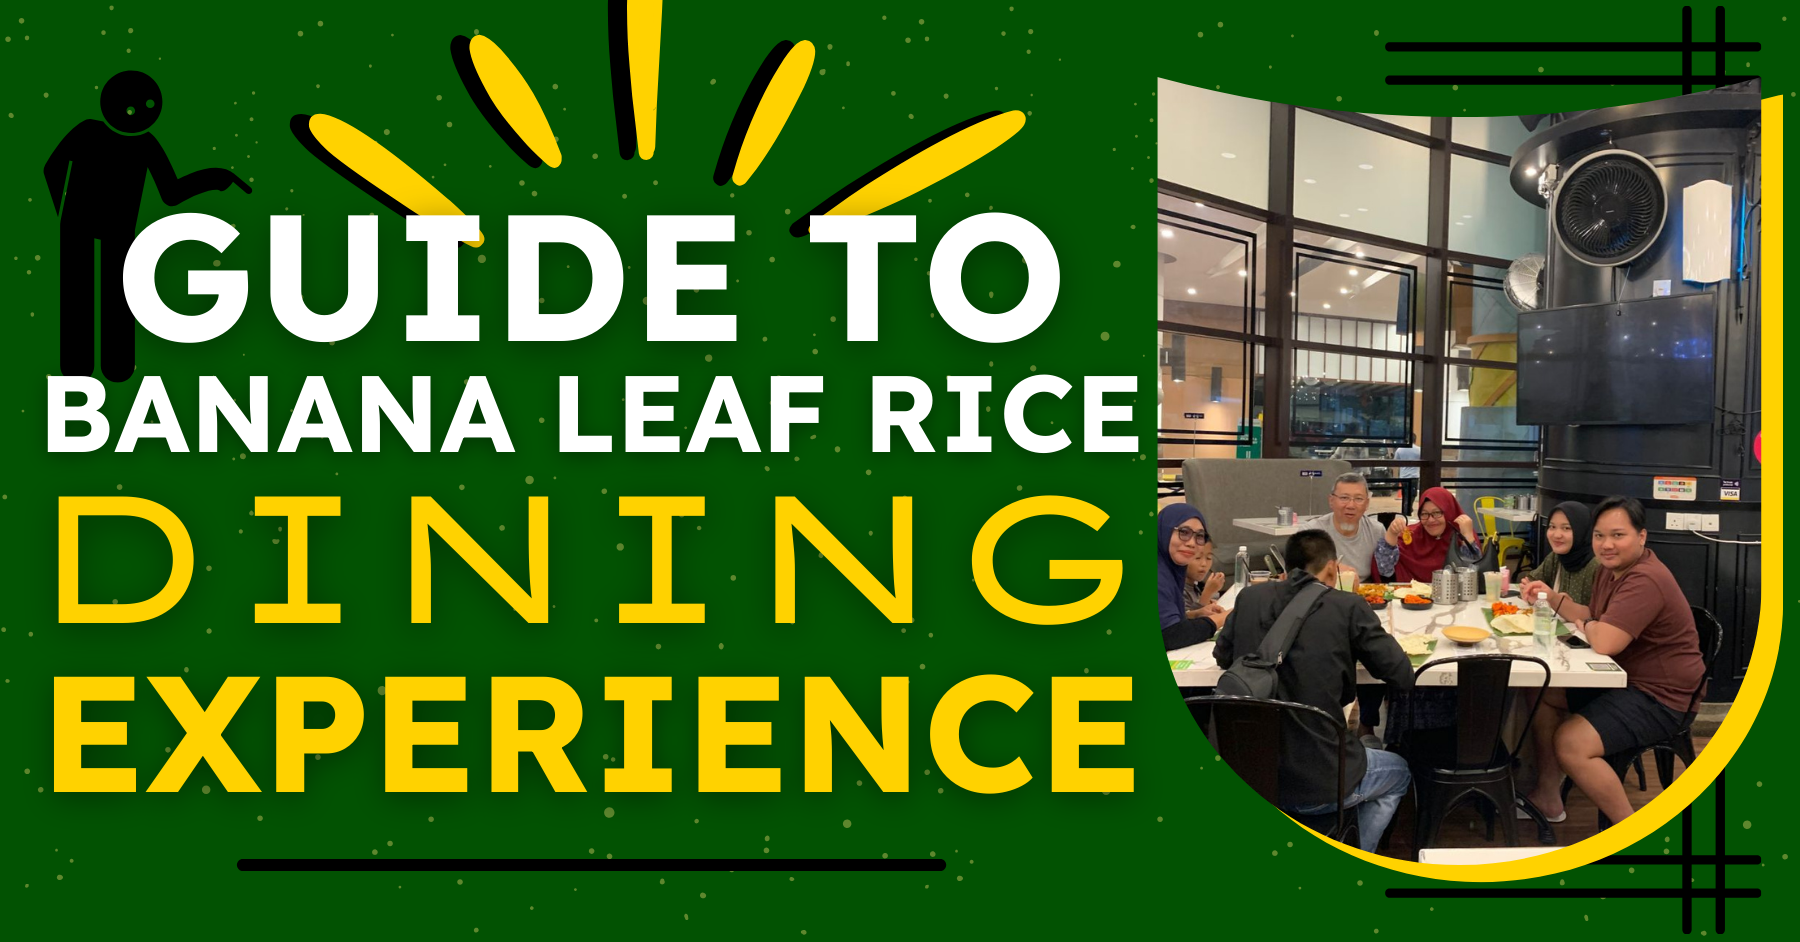 Guide to banana leaf rice dining experience